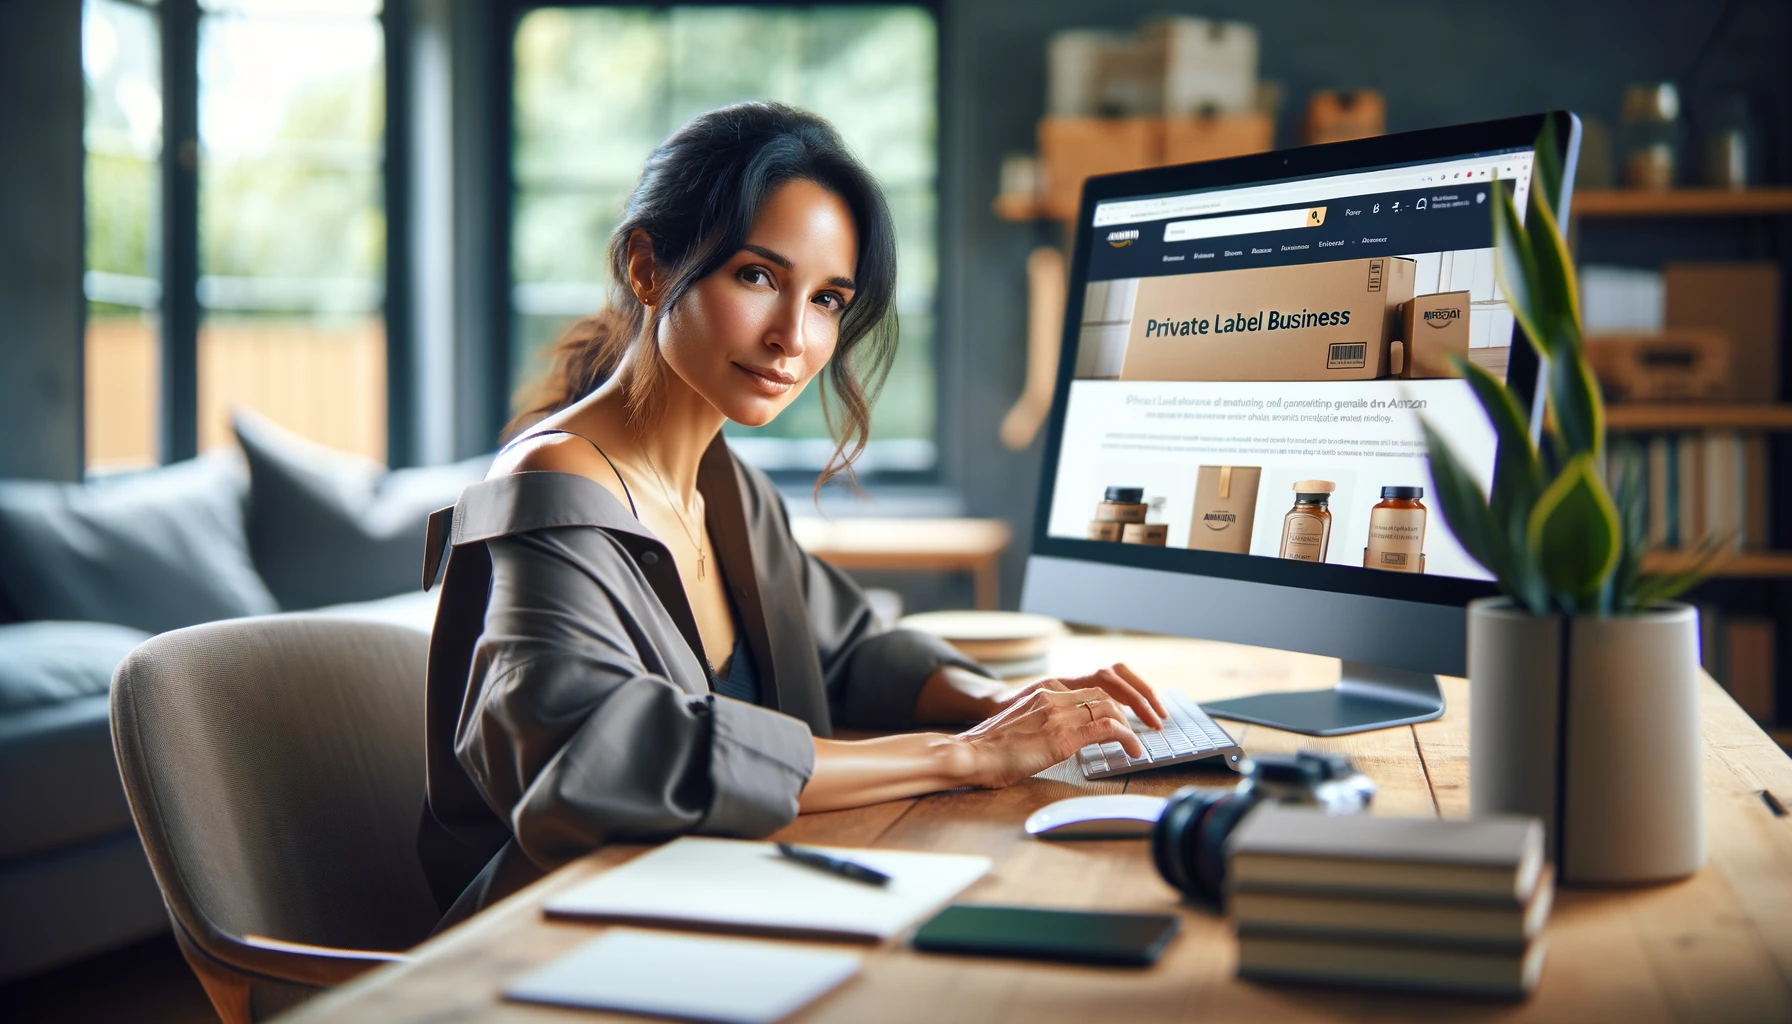 A female entrepreneur of mixed descent is seated at her computer in a modern home office, actively working on starting a private label business on Amazon. She has a focused and determined expression, indicative of her entrepreneurial spirit and dedication. The office is equipped with a stylish, contemporary setup, including a large monitor displaying the Amazon website and notes related to private label business. Natural light enhances the photorealistic quality of the scene, which emulates a shot taken with a Canon EOS 5D Mark IV and a 50mm lens, slightly overexposed for a bright and airy feel.